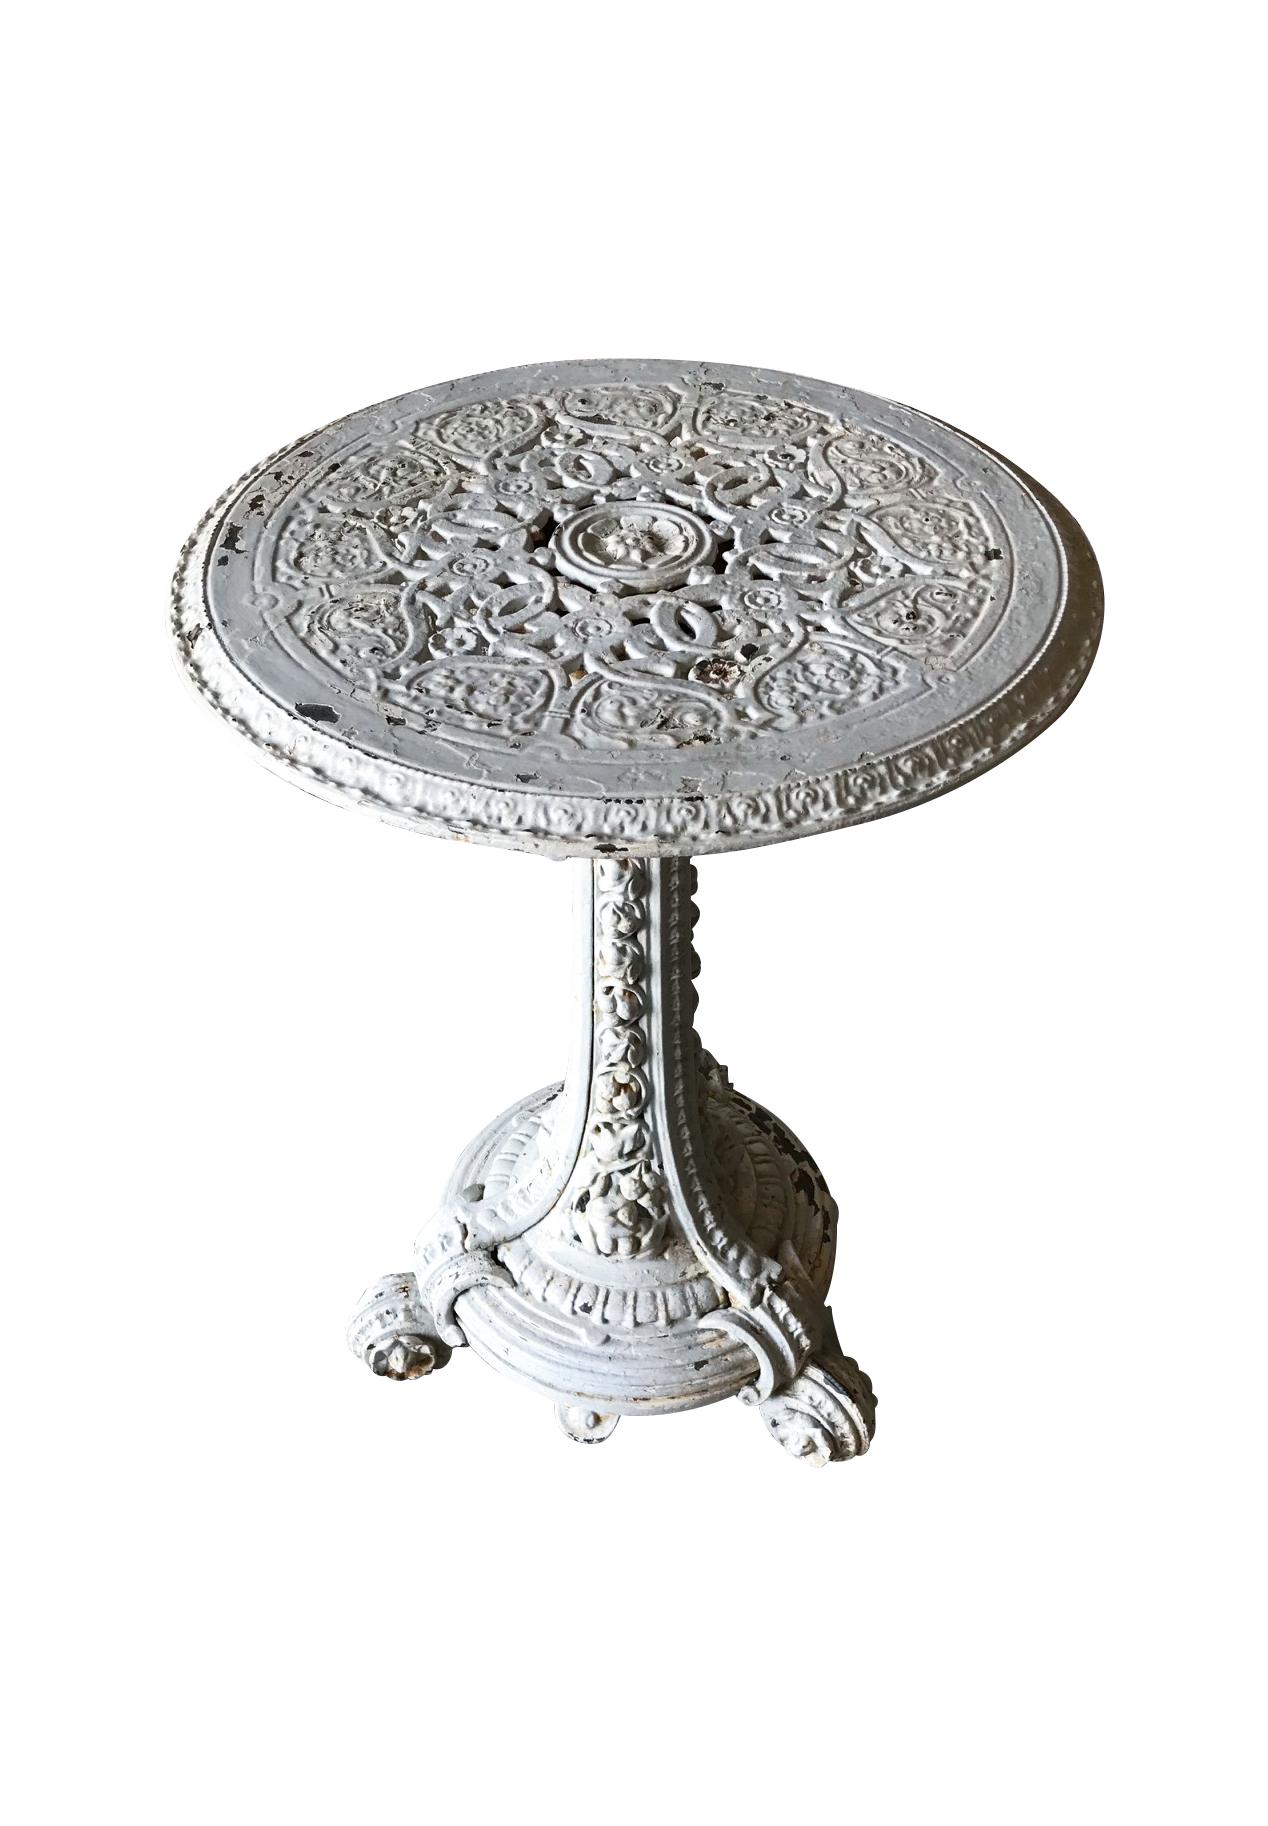 19th century cast iron garden / conservatory table attributed to the Coalbookdale Foundry

The Coalbrookdale Foundry was founded in the early eighteenth century, the pioneering iron works of the Industrial Revolution at Ironbridge, Shropshire in